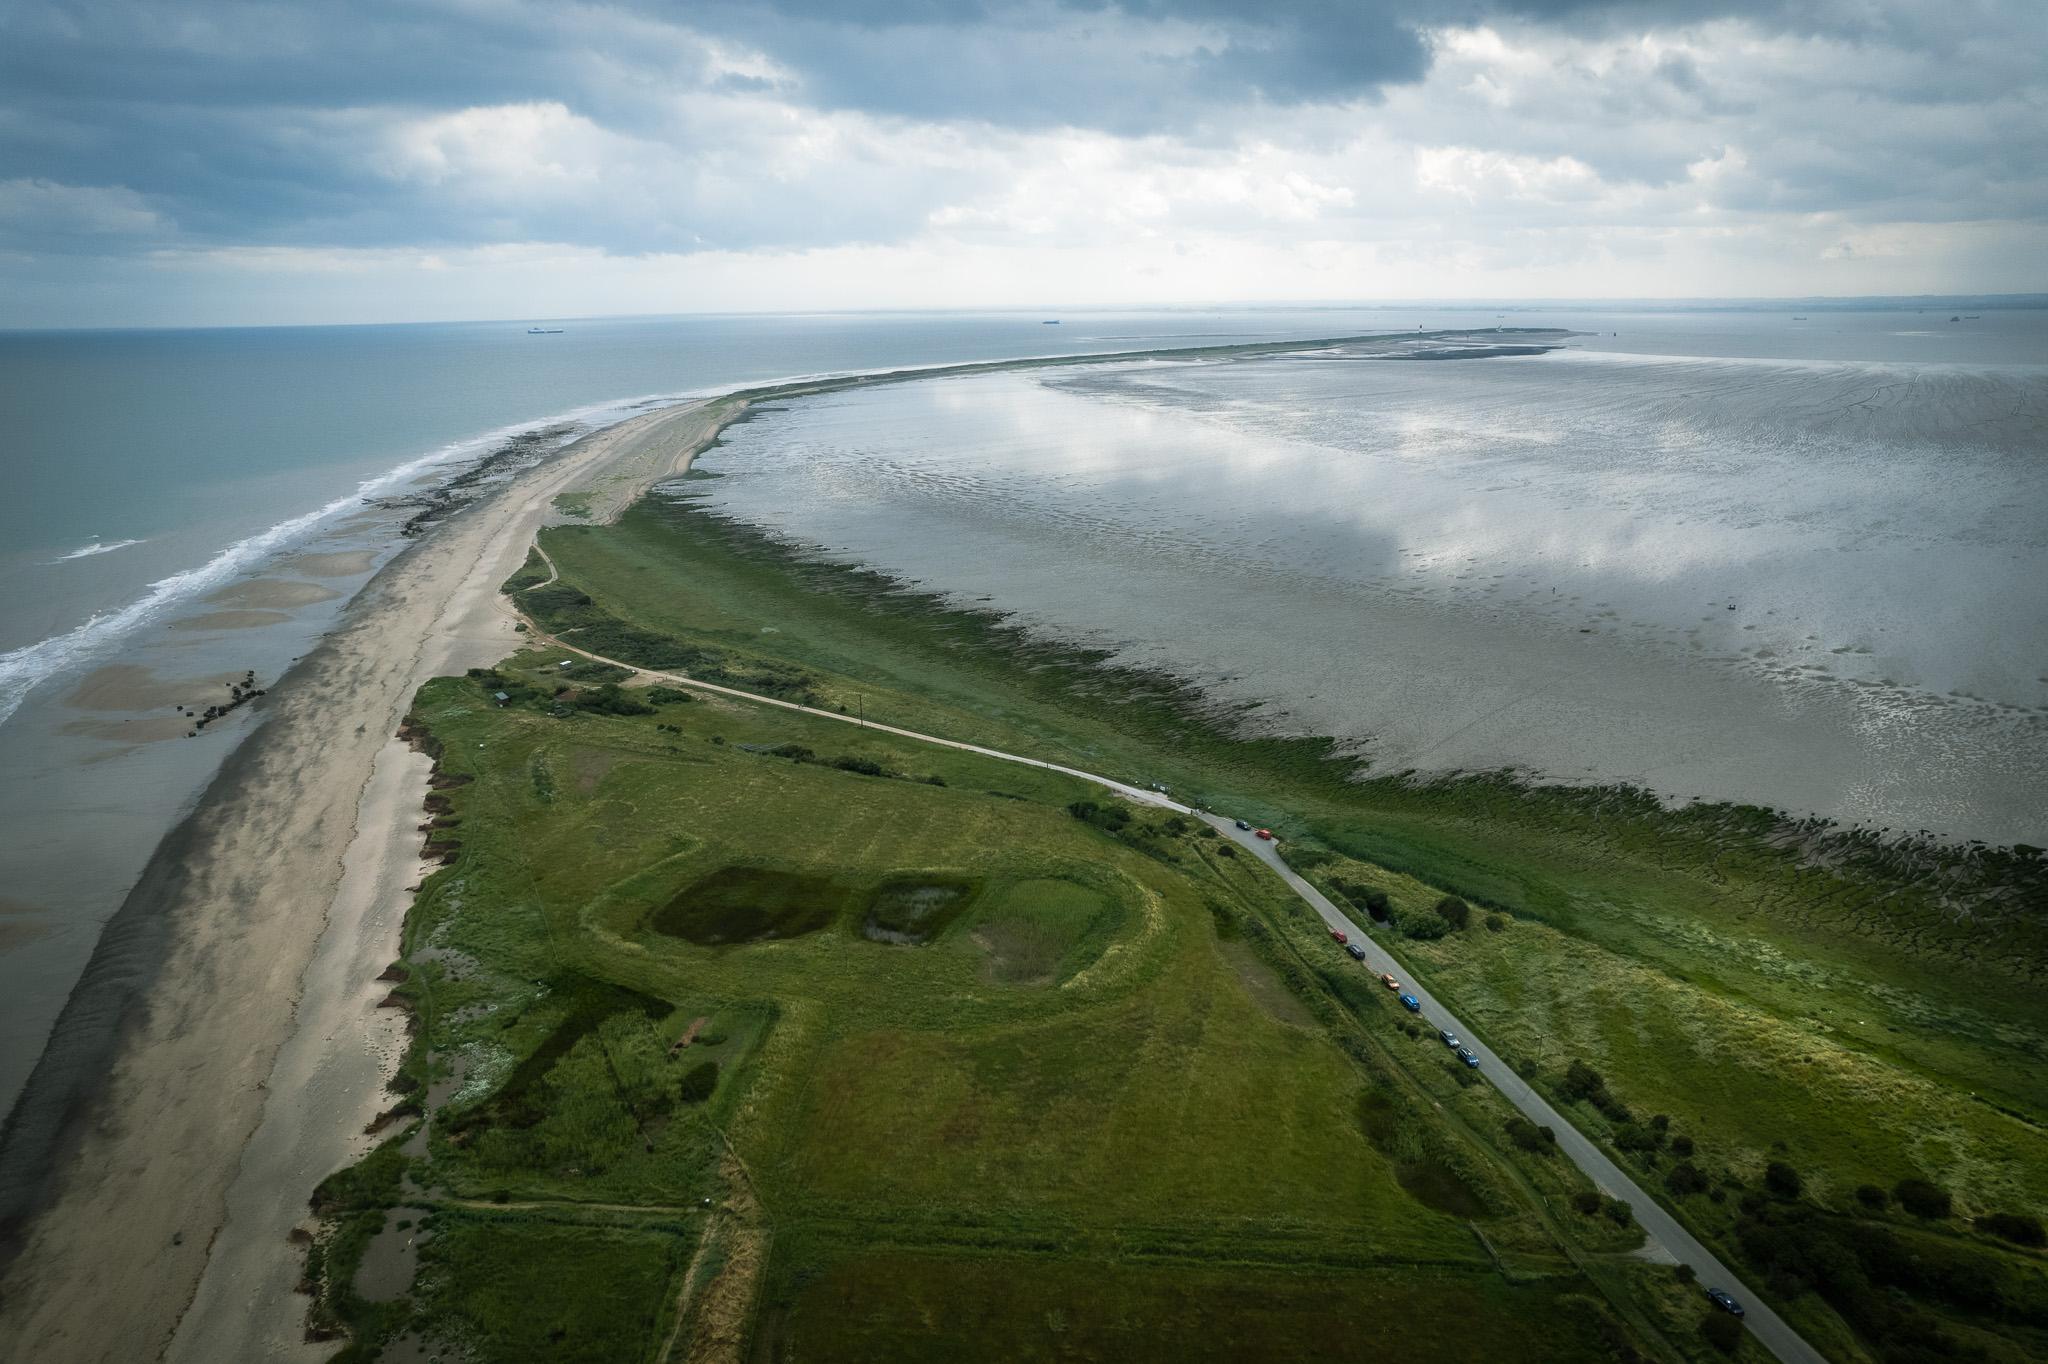 Spurn Point, stretching out into the North Sea. Photo: Markus Stitz